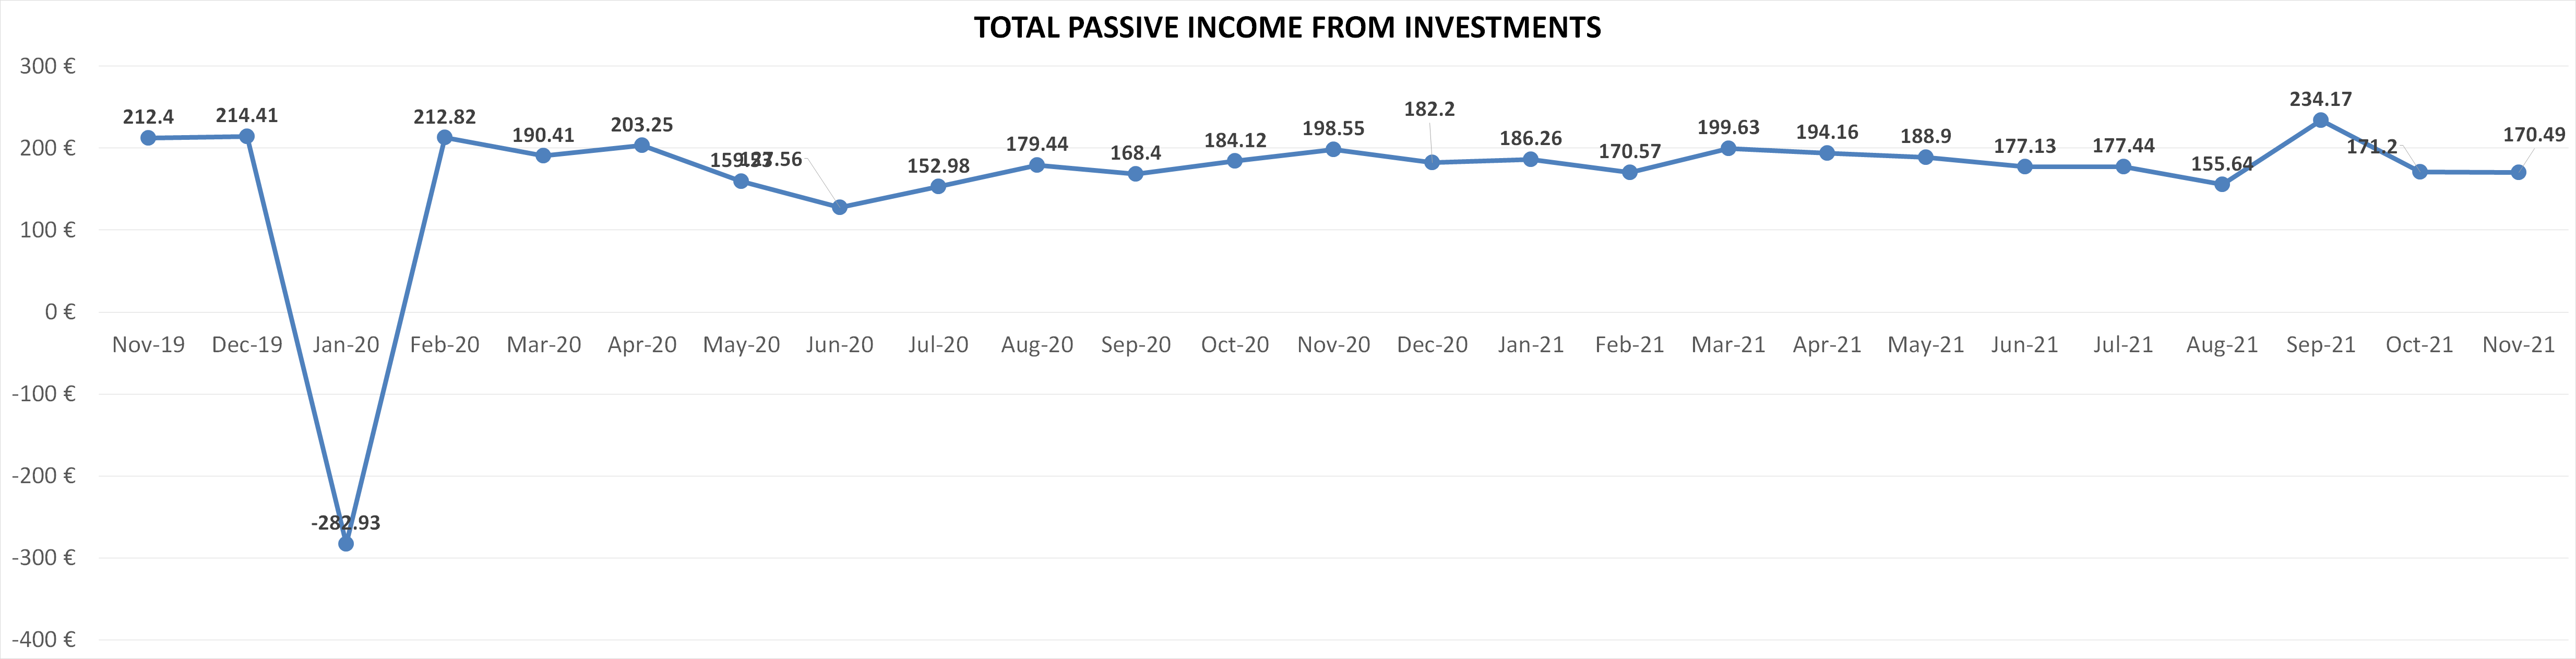 Total passive income from investments november 2021